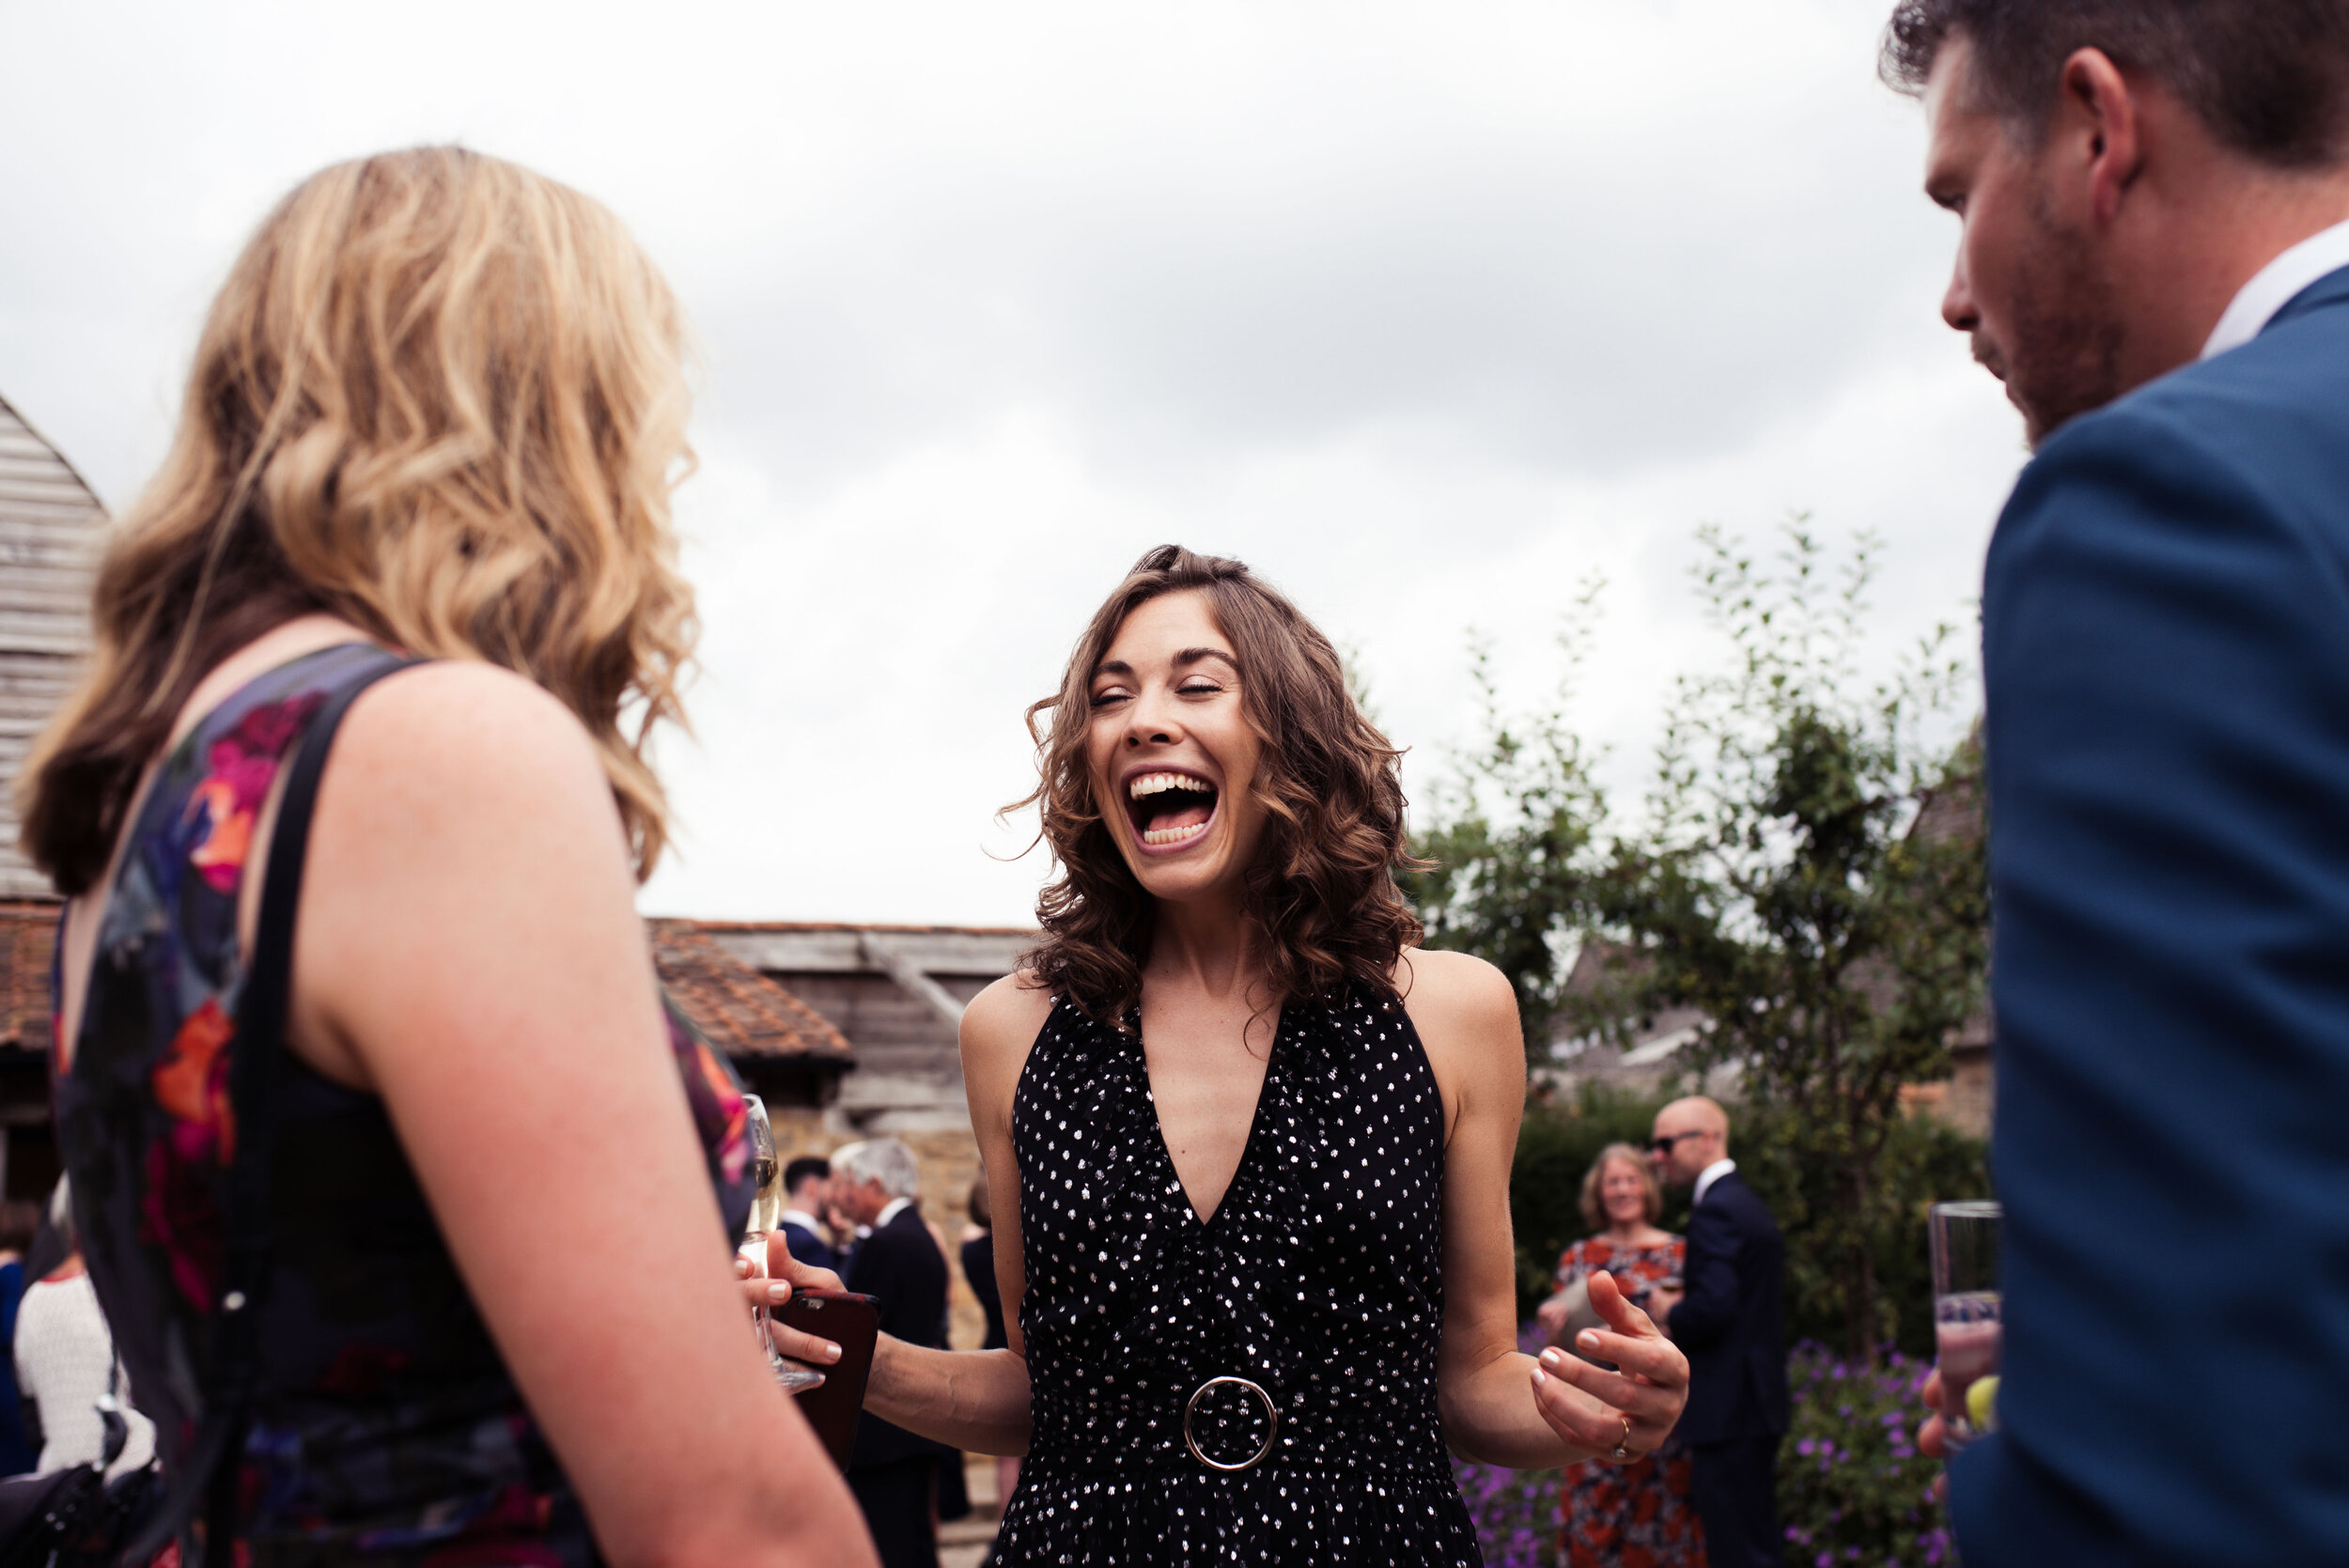 A wedding guest throws her hands in the air while laughing